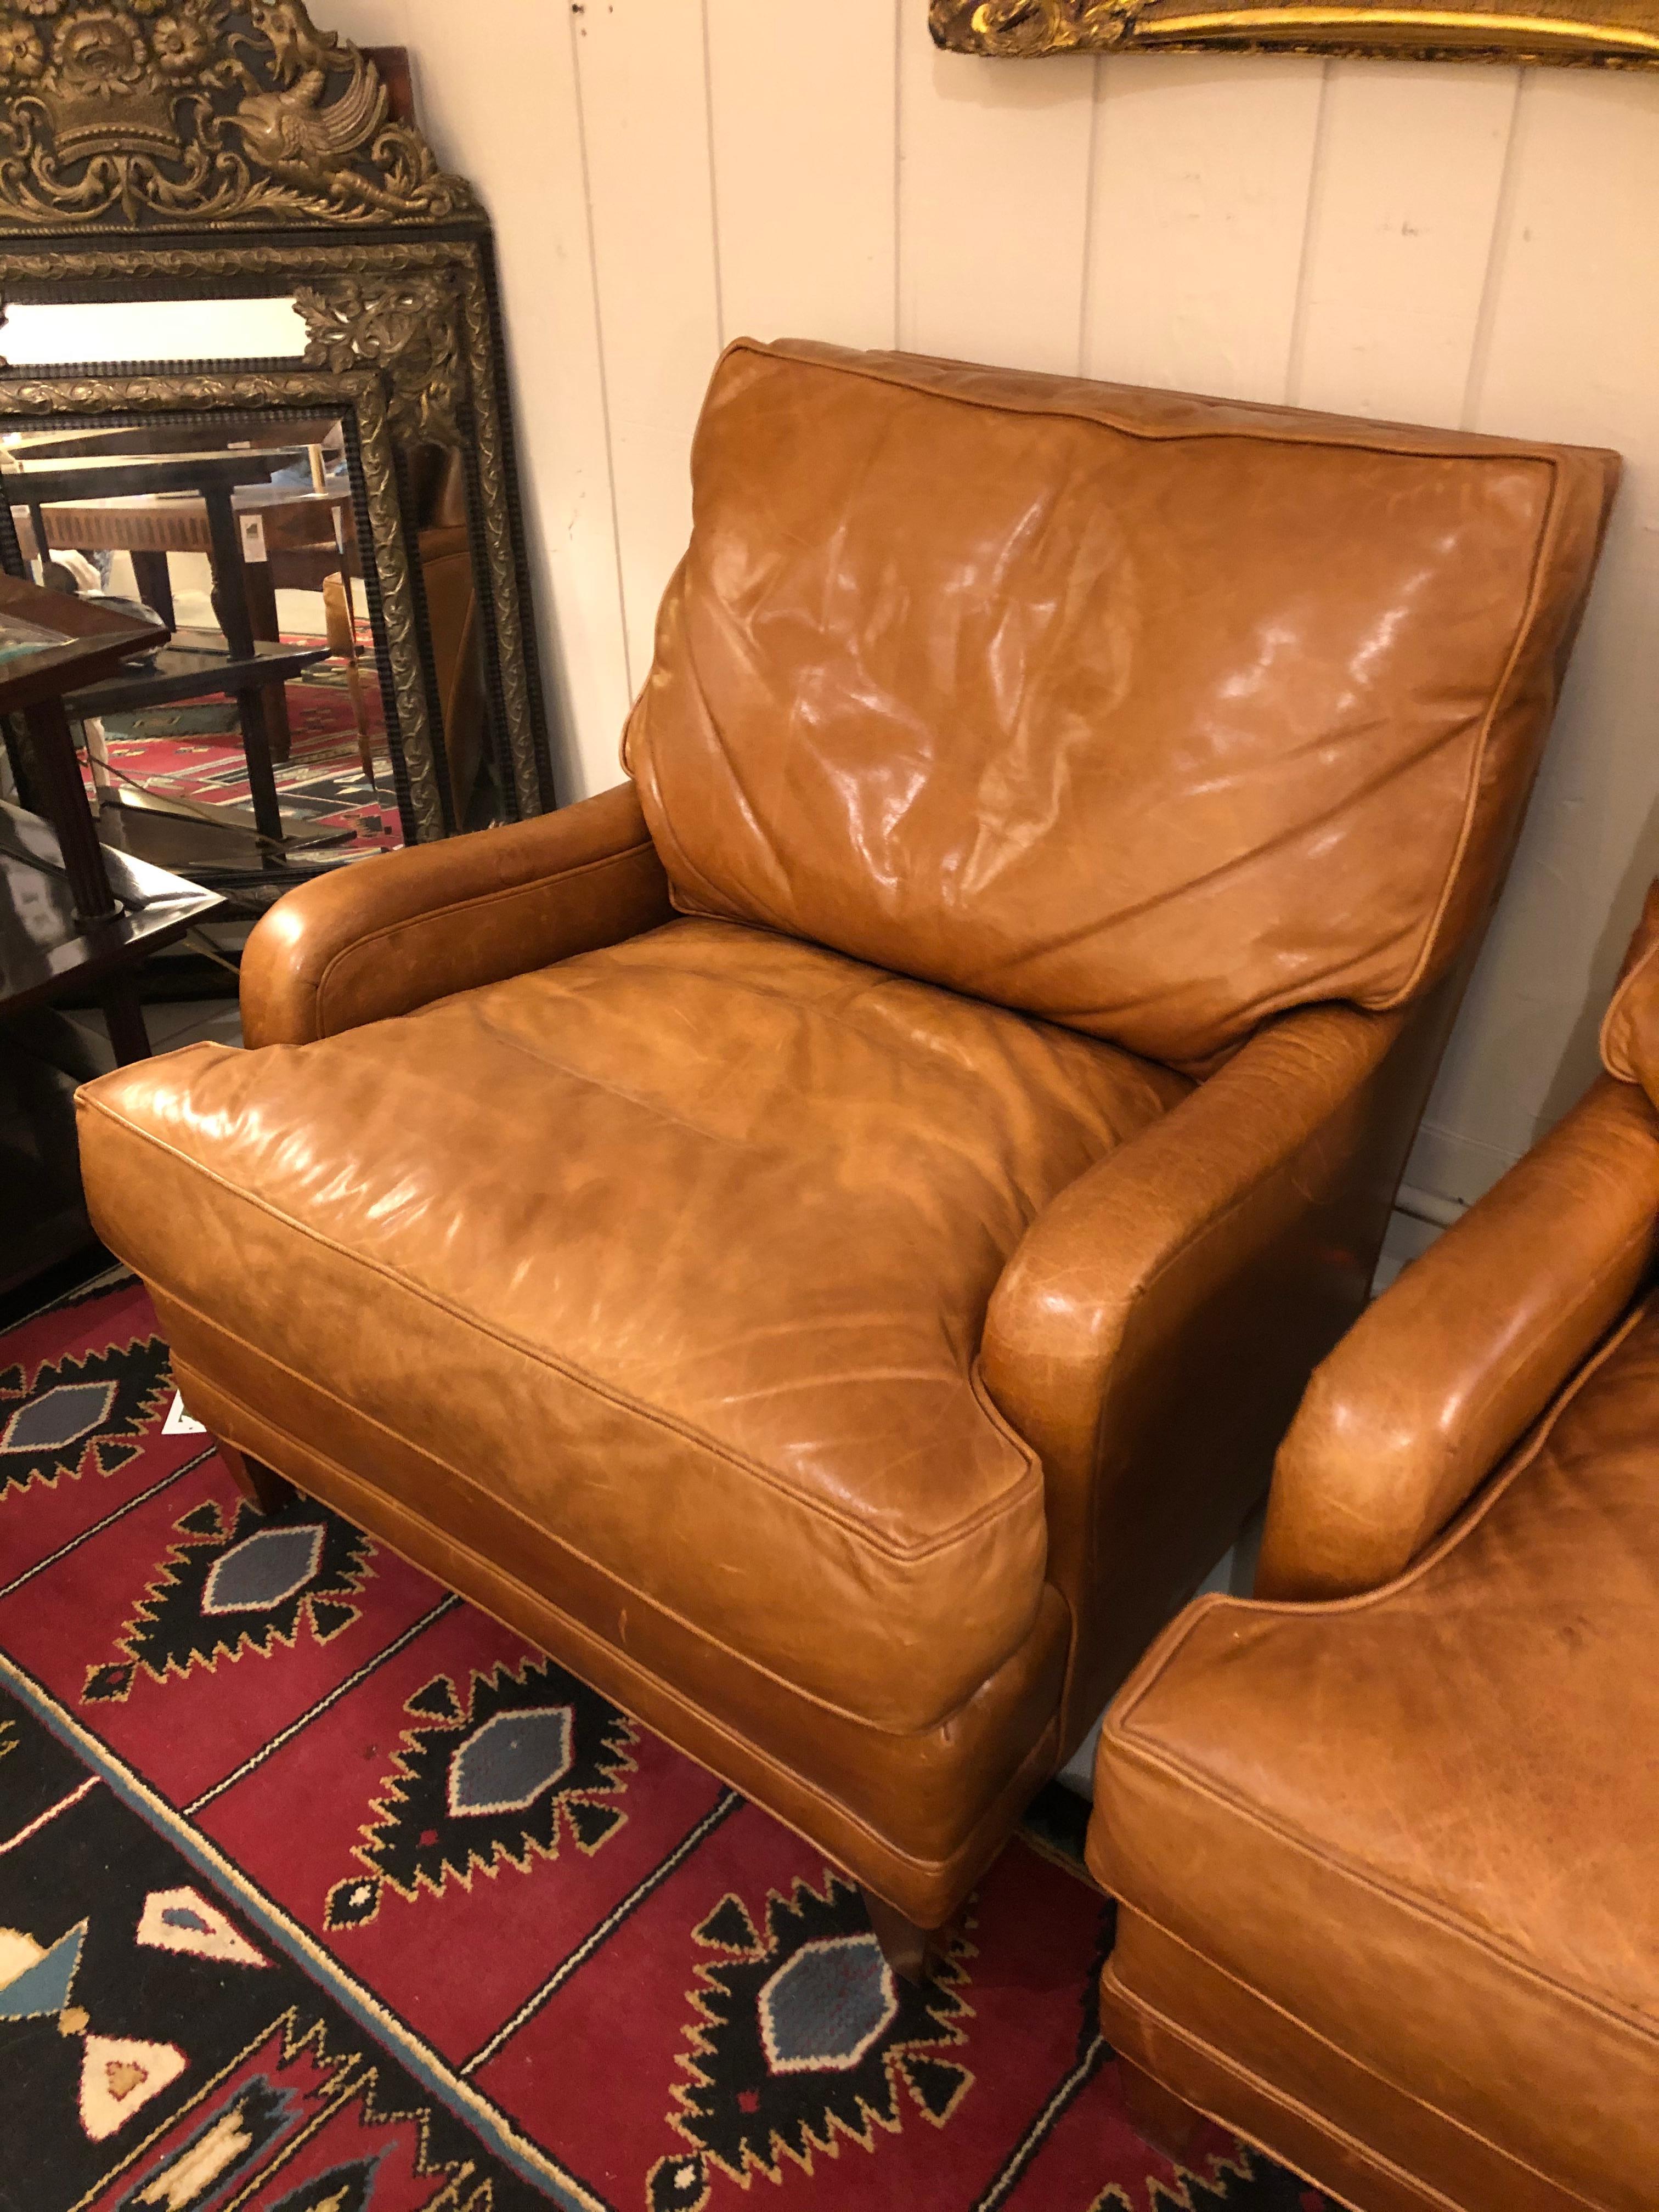 An enviably comfortable pair of luxurious butterscotch leather club chairs having Classic style and a top of the line maker, Nancy Corzine.